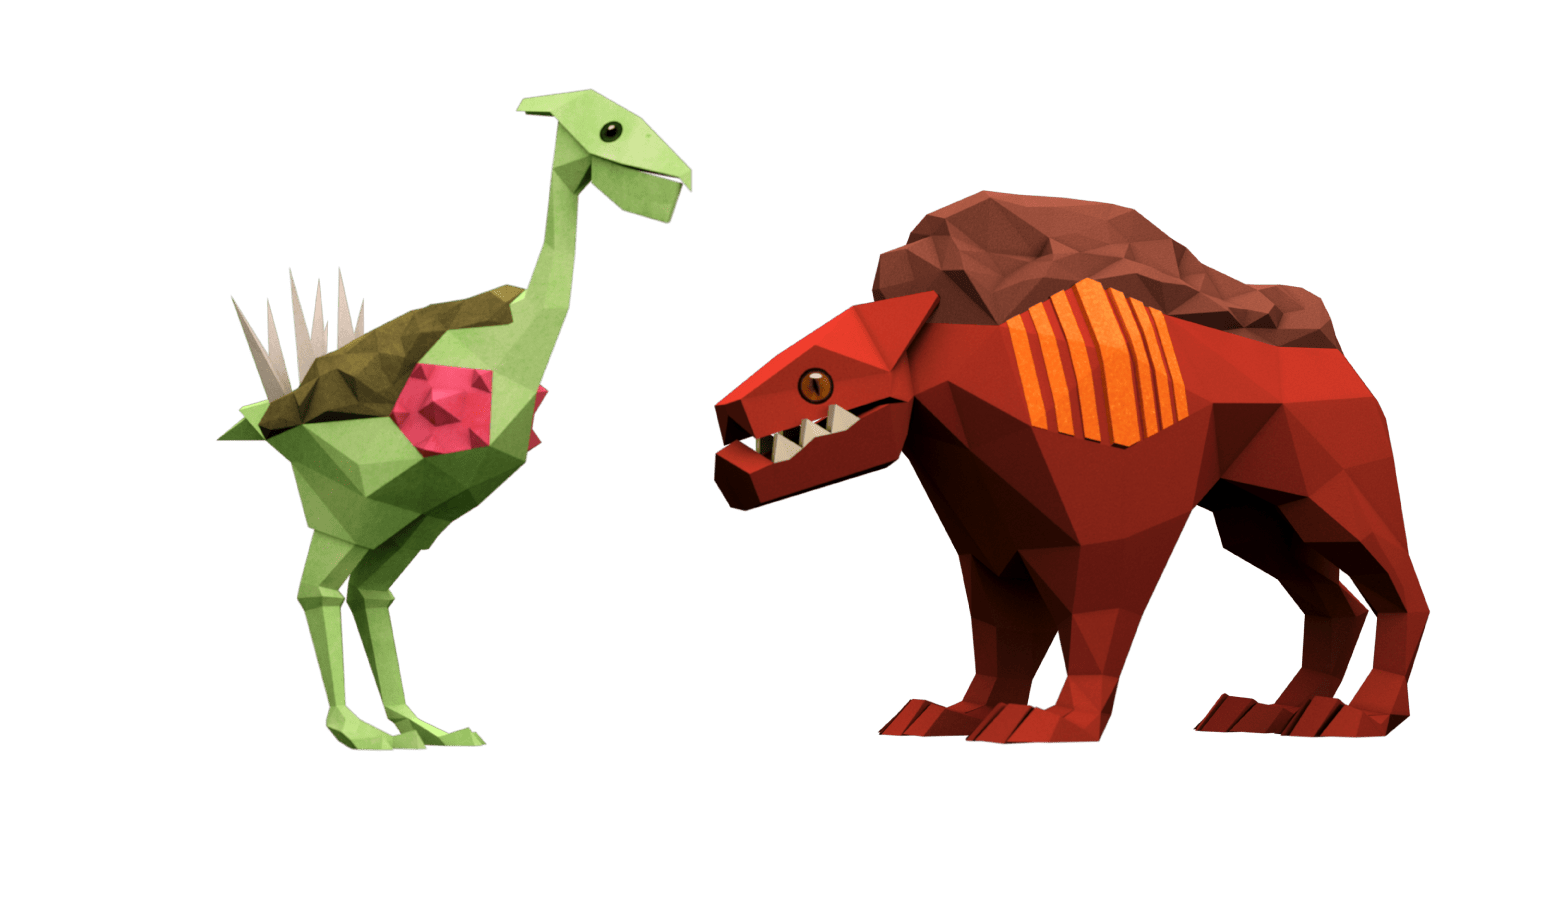 An illustration of two animals from Amplify Science